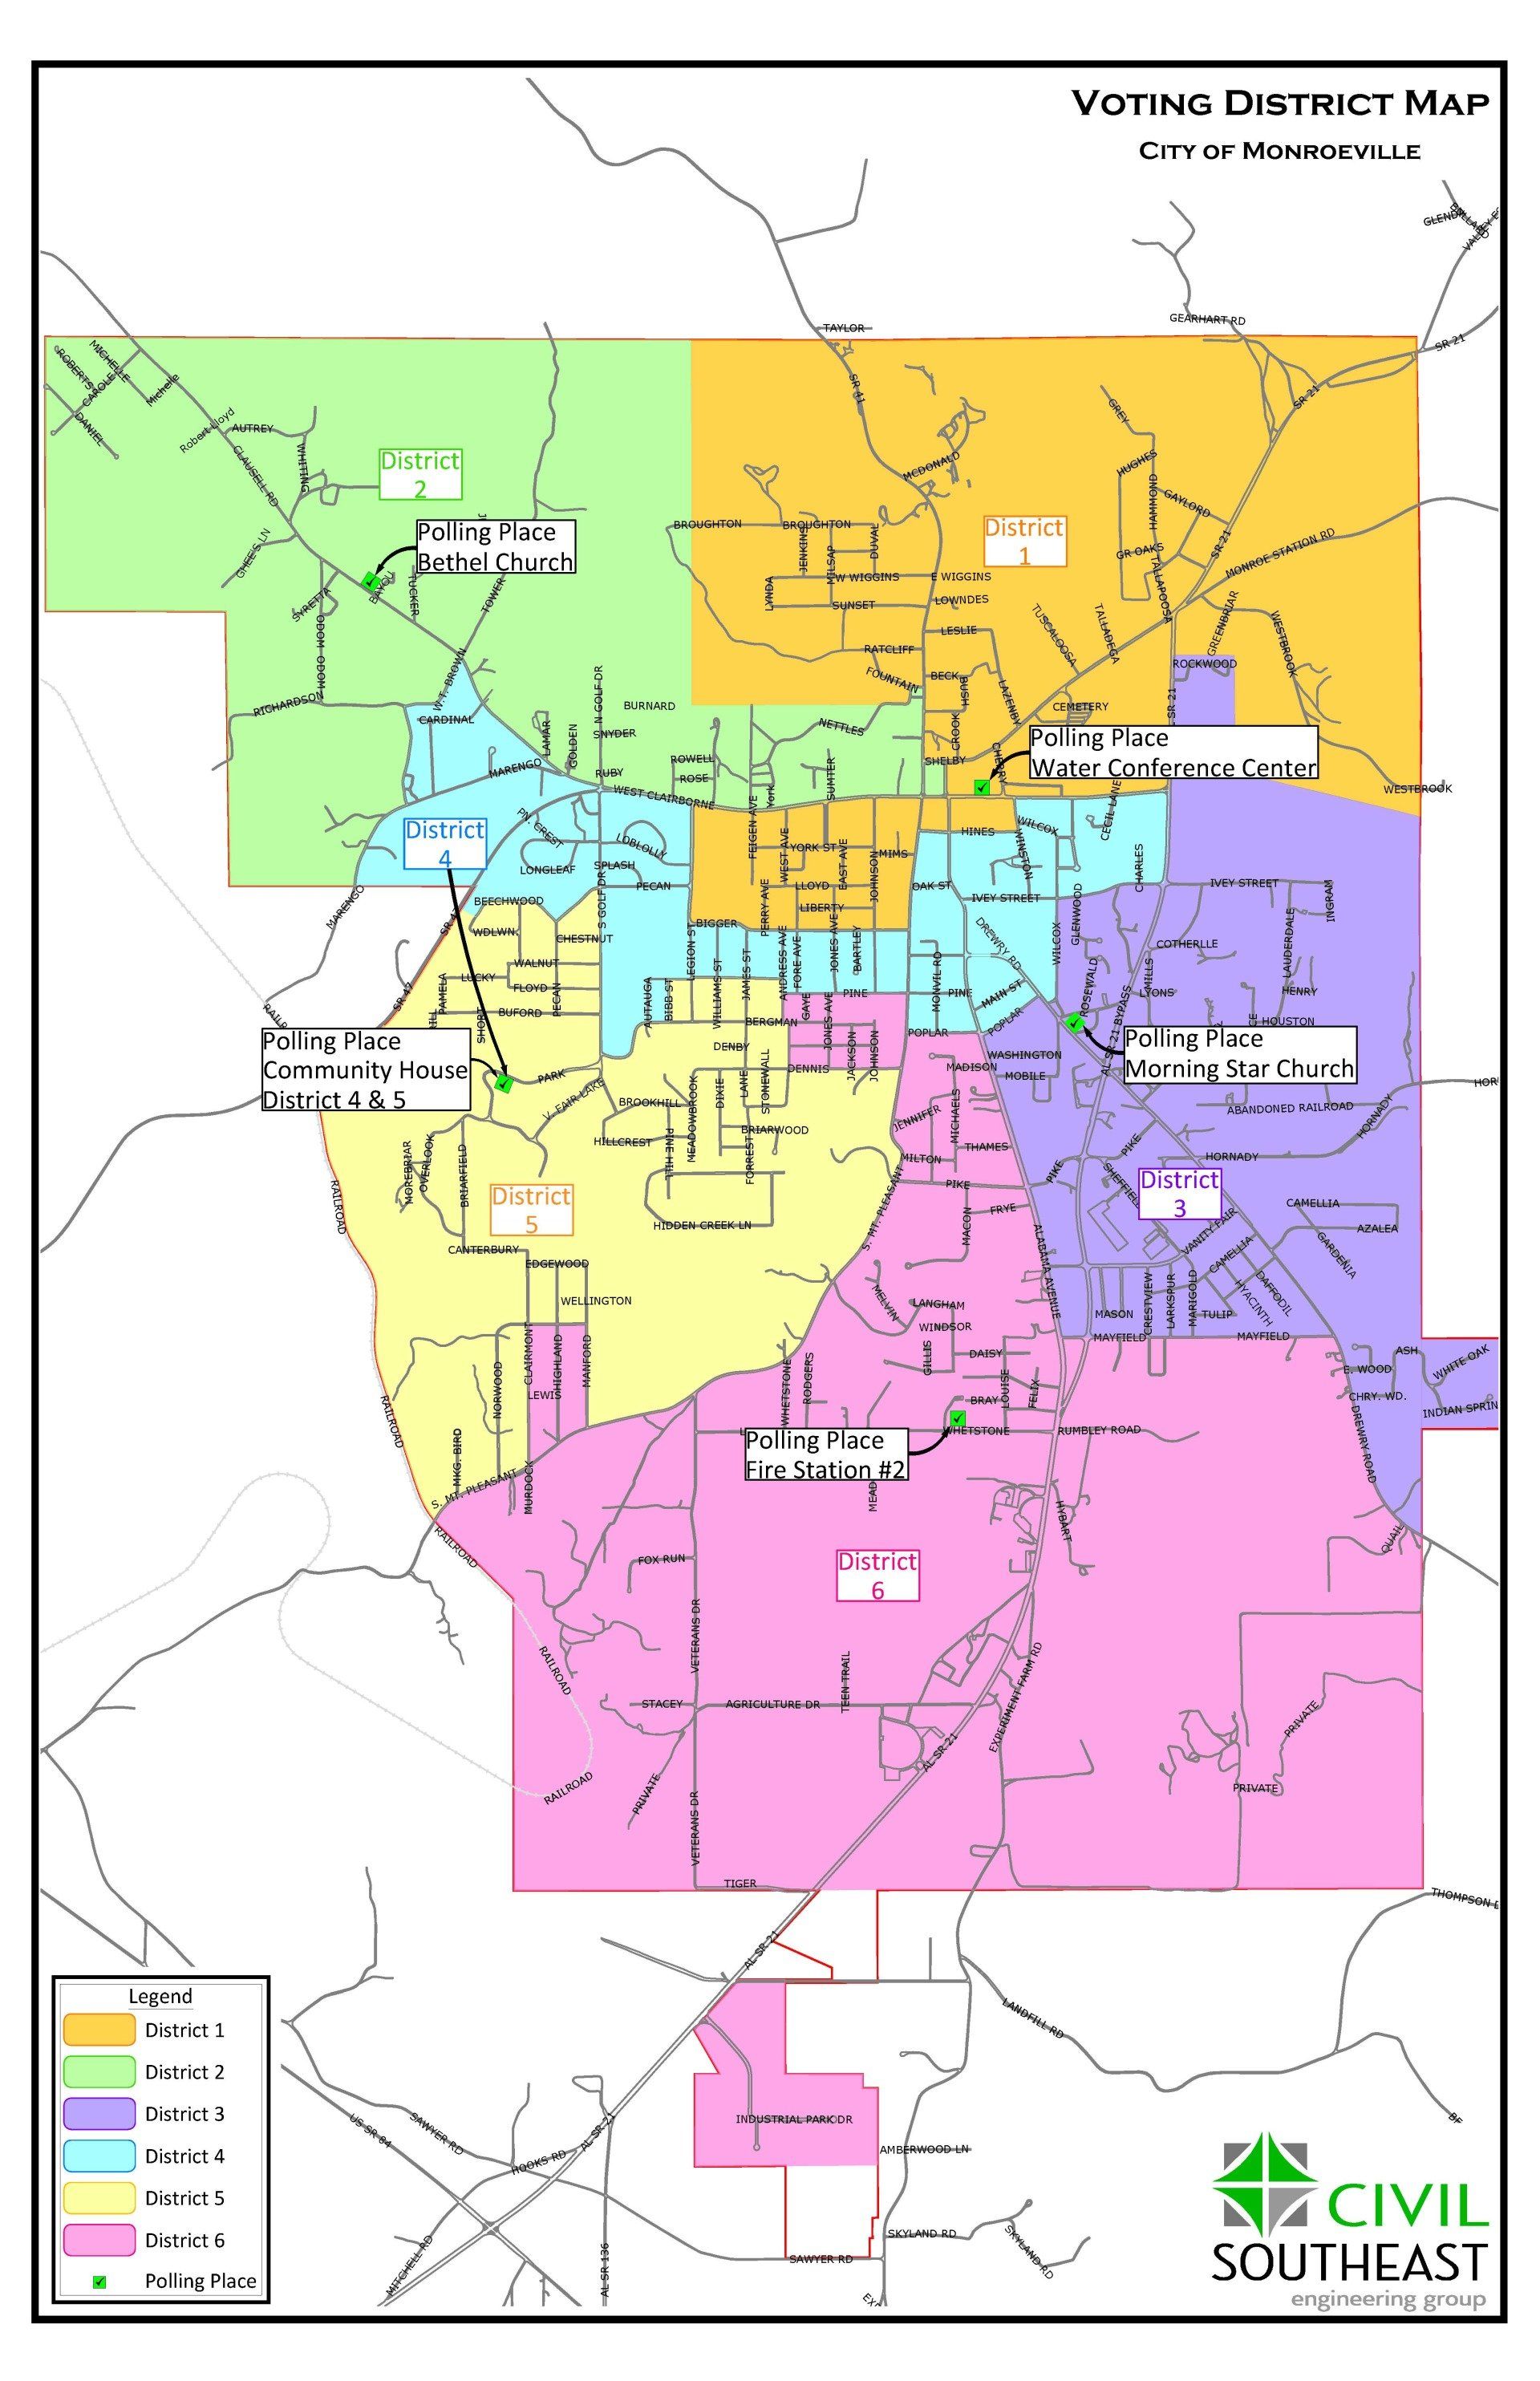 VOTING DISTRICT MAP